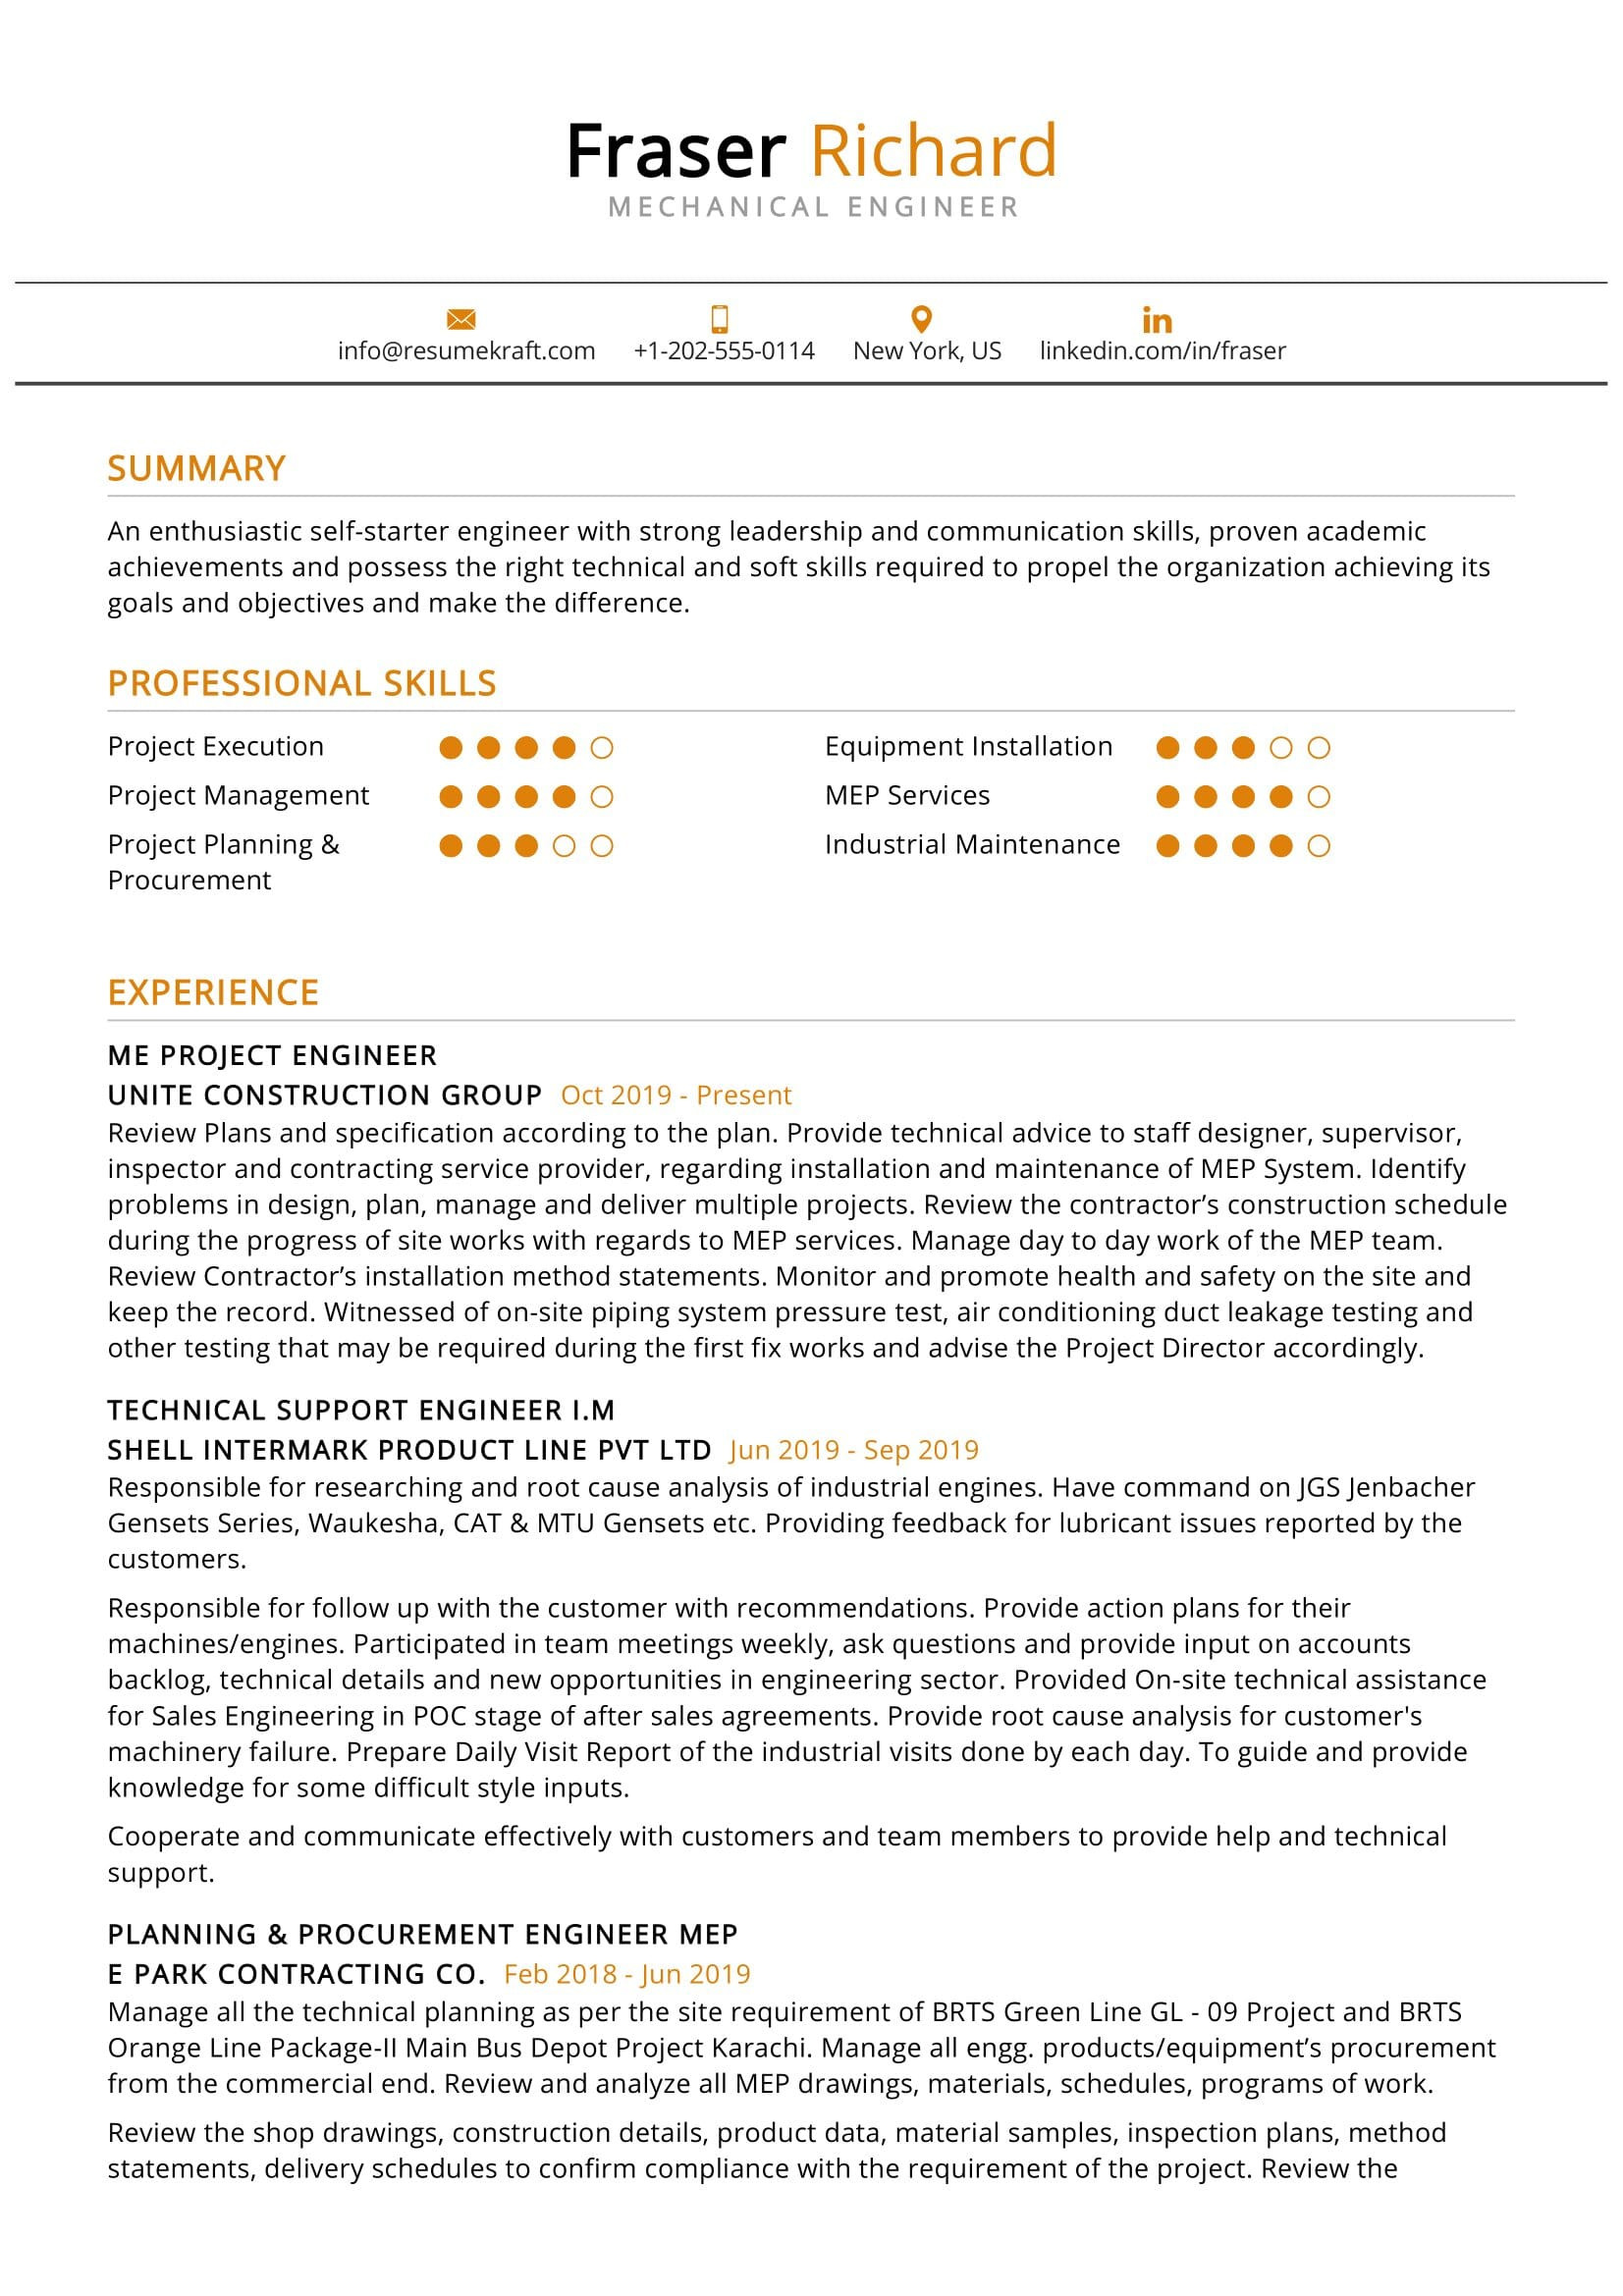 Mechanical Engineer Oil and Gas Resume Samples Mechanical Engineer Resume Example 2022 Writing Tips – Resumekraft